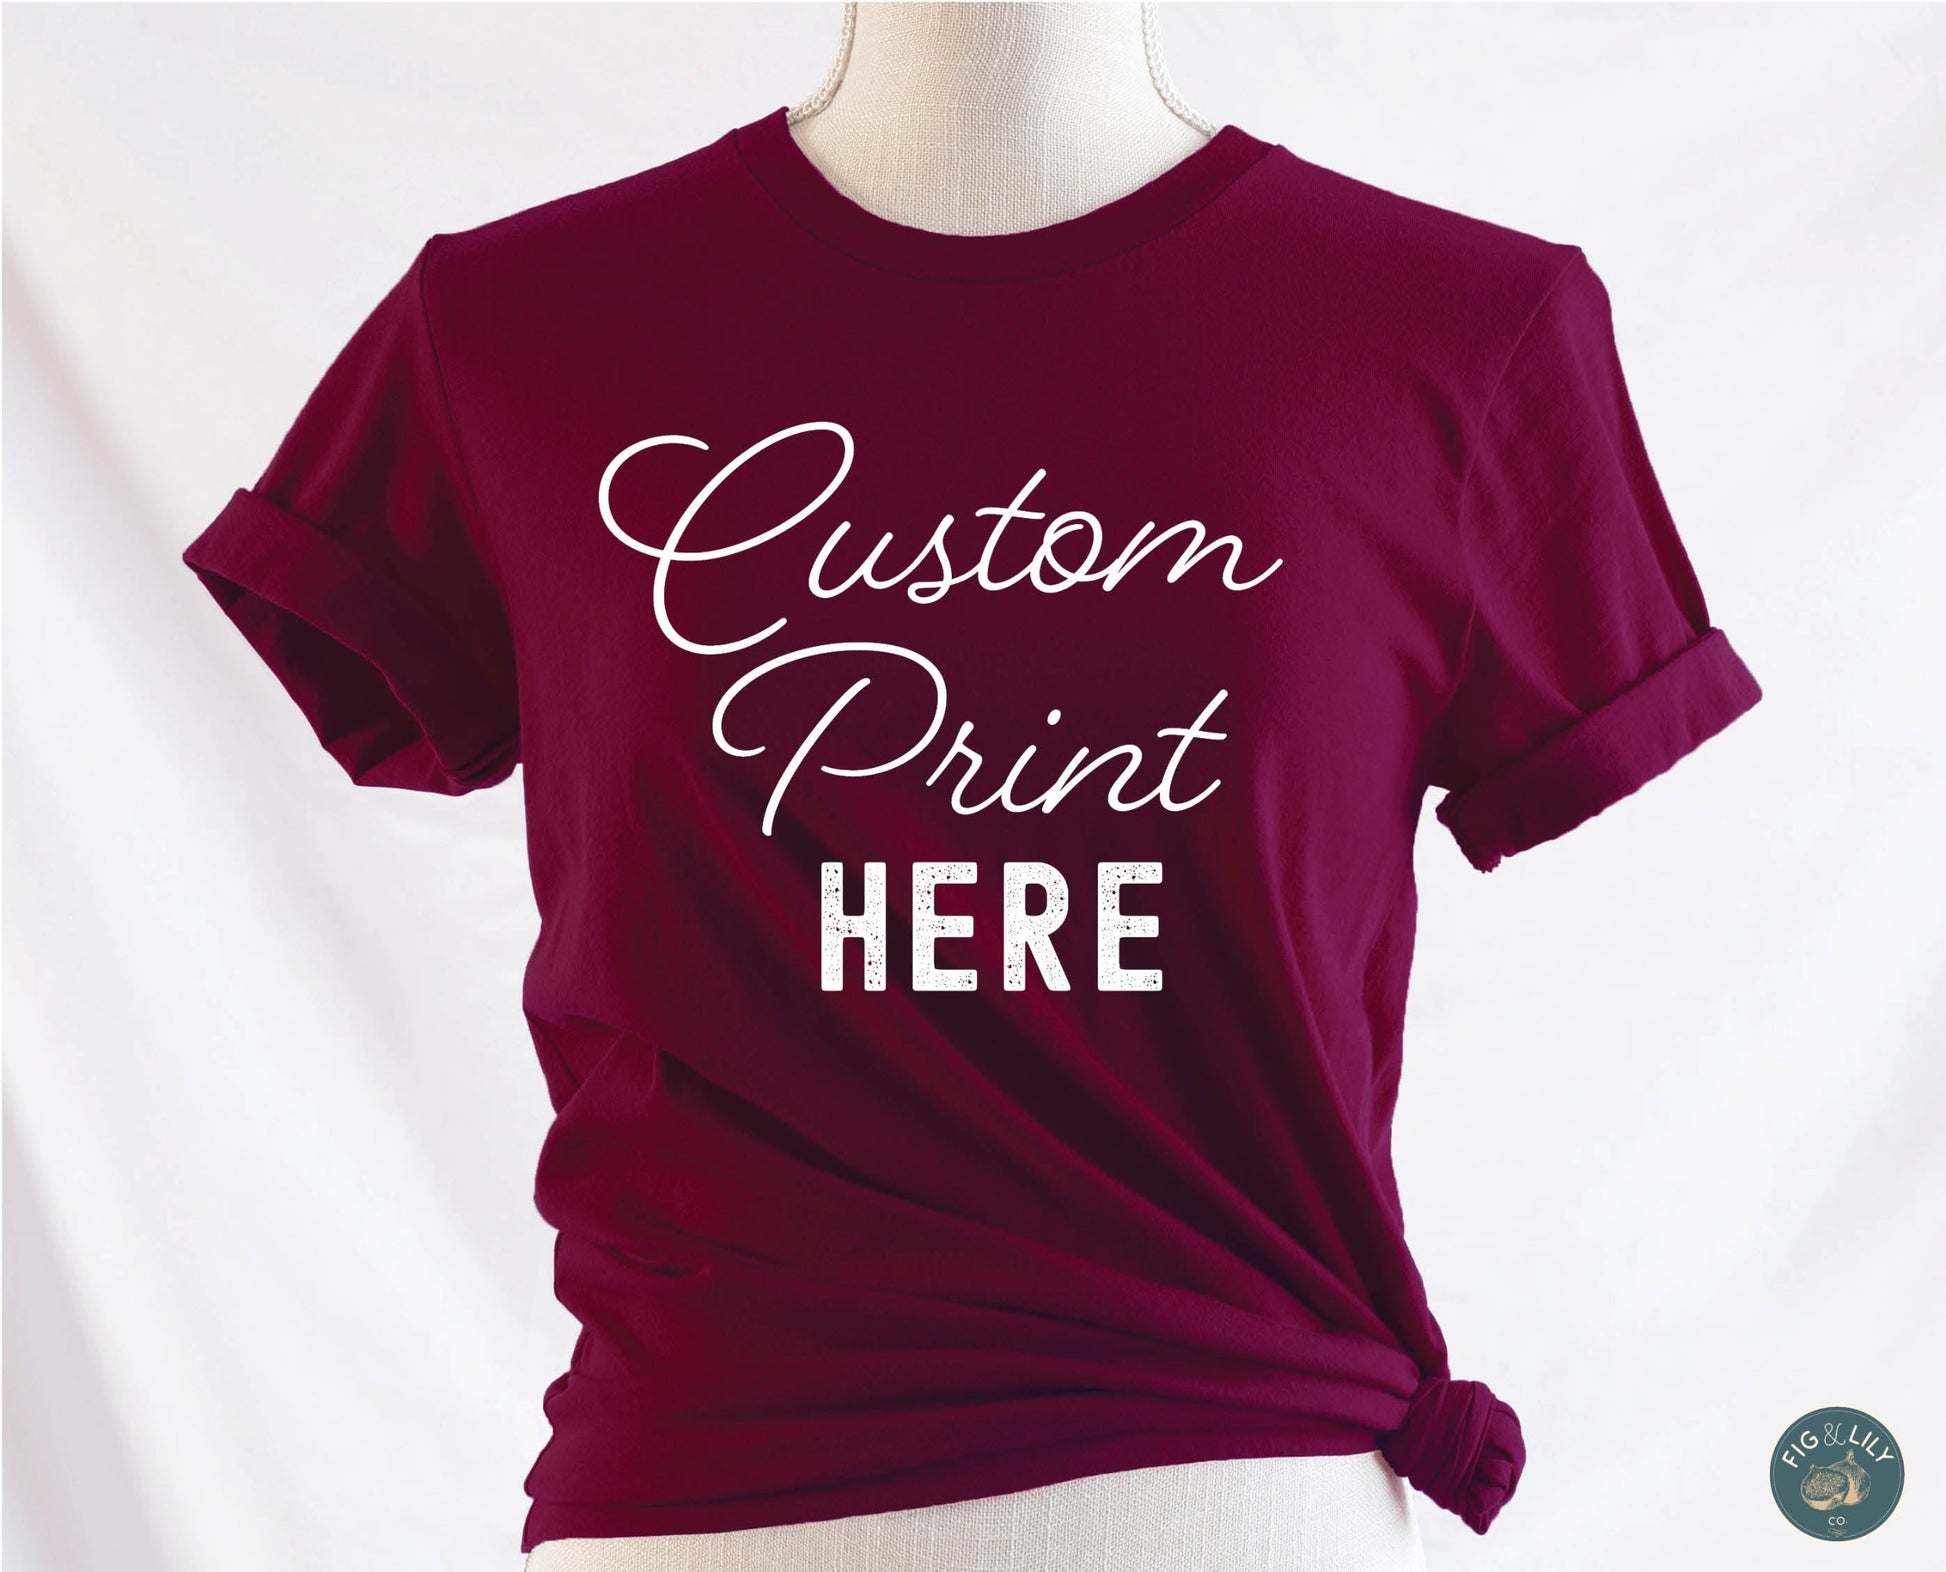 how to print custom T-shirts with your company logo on them